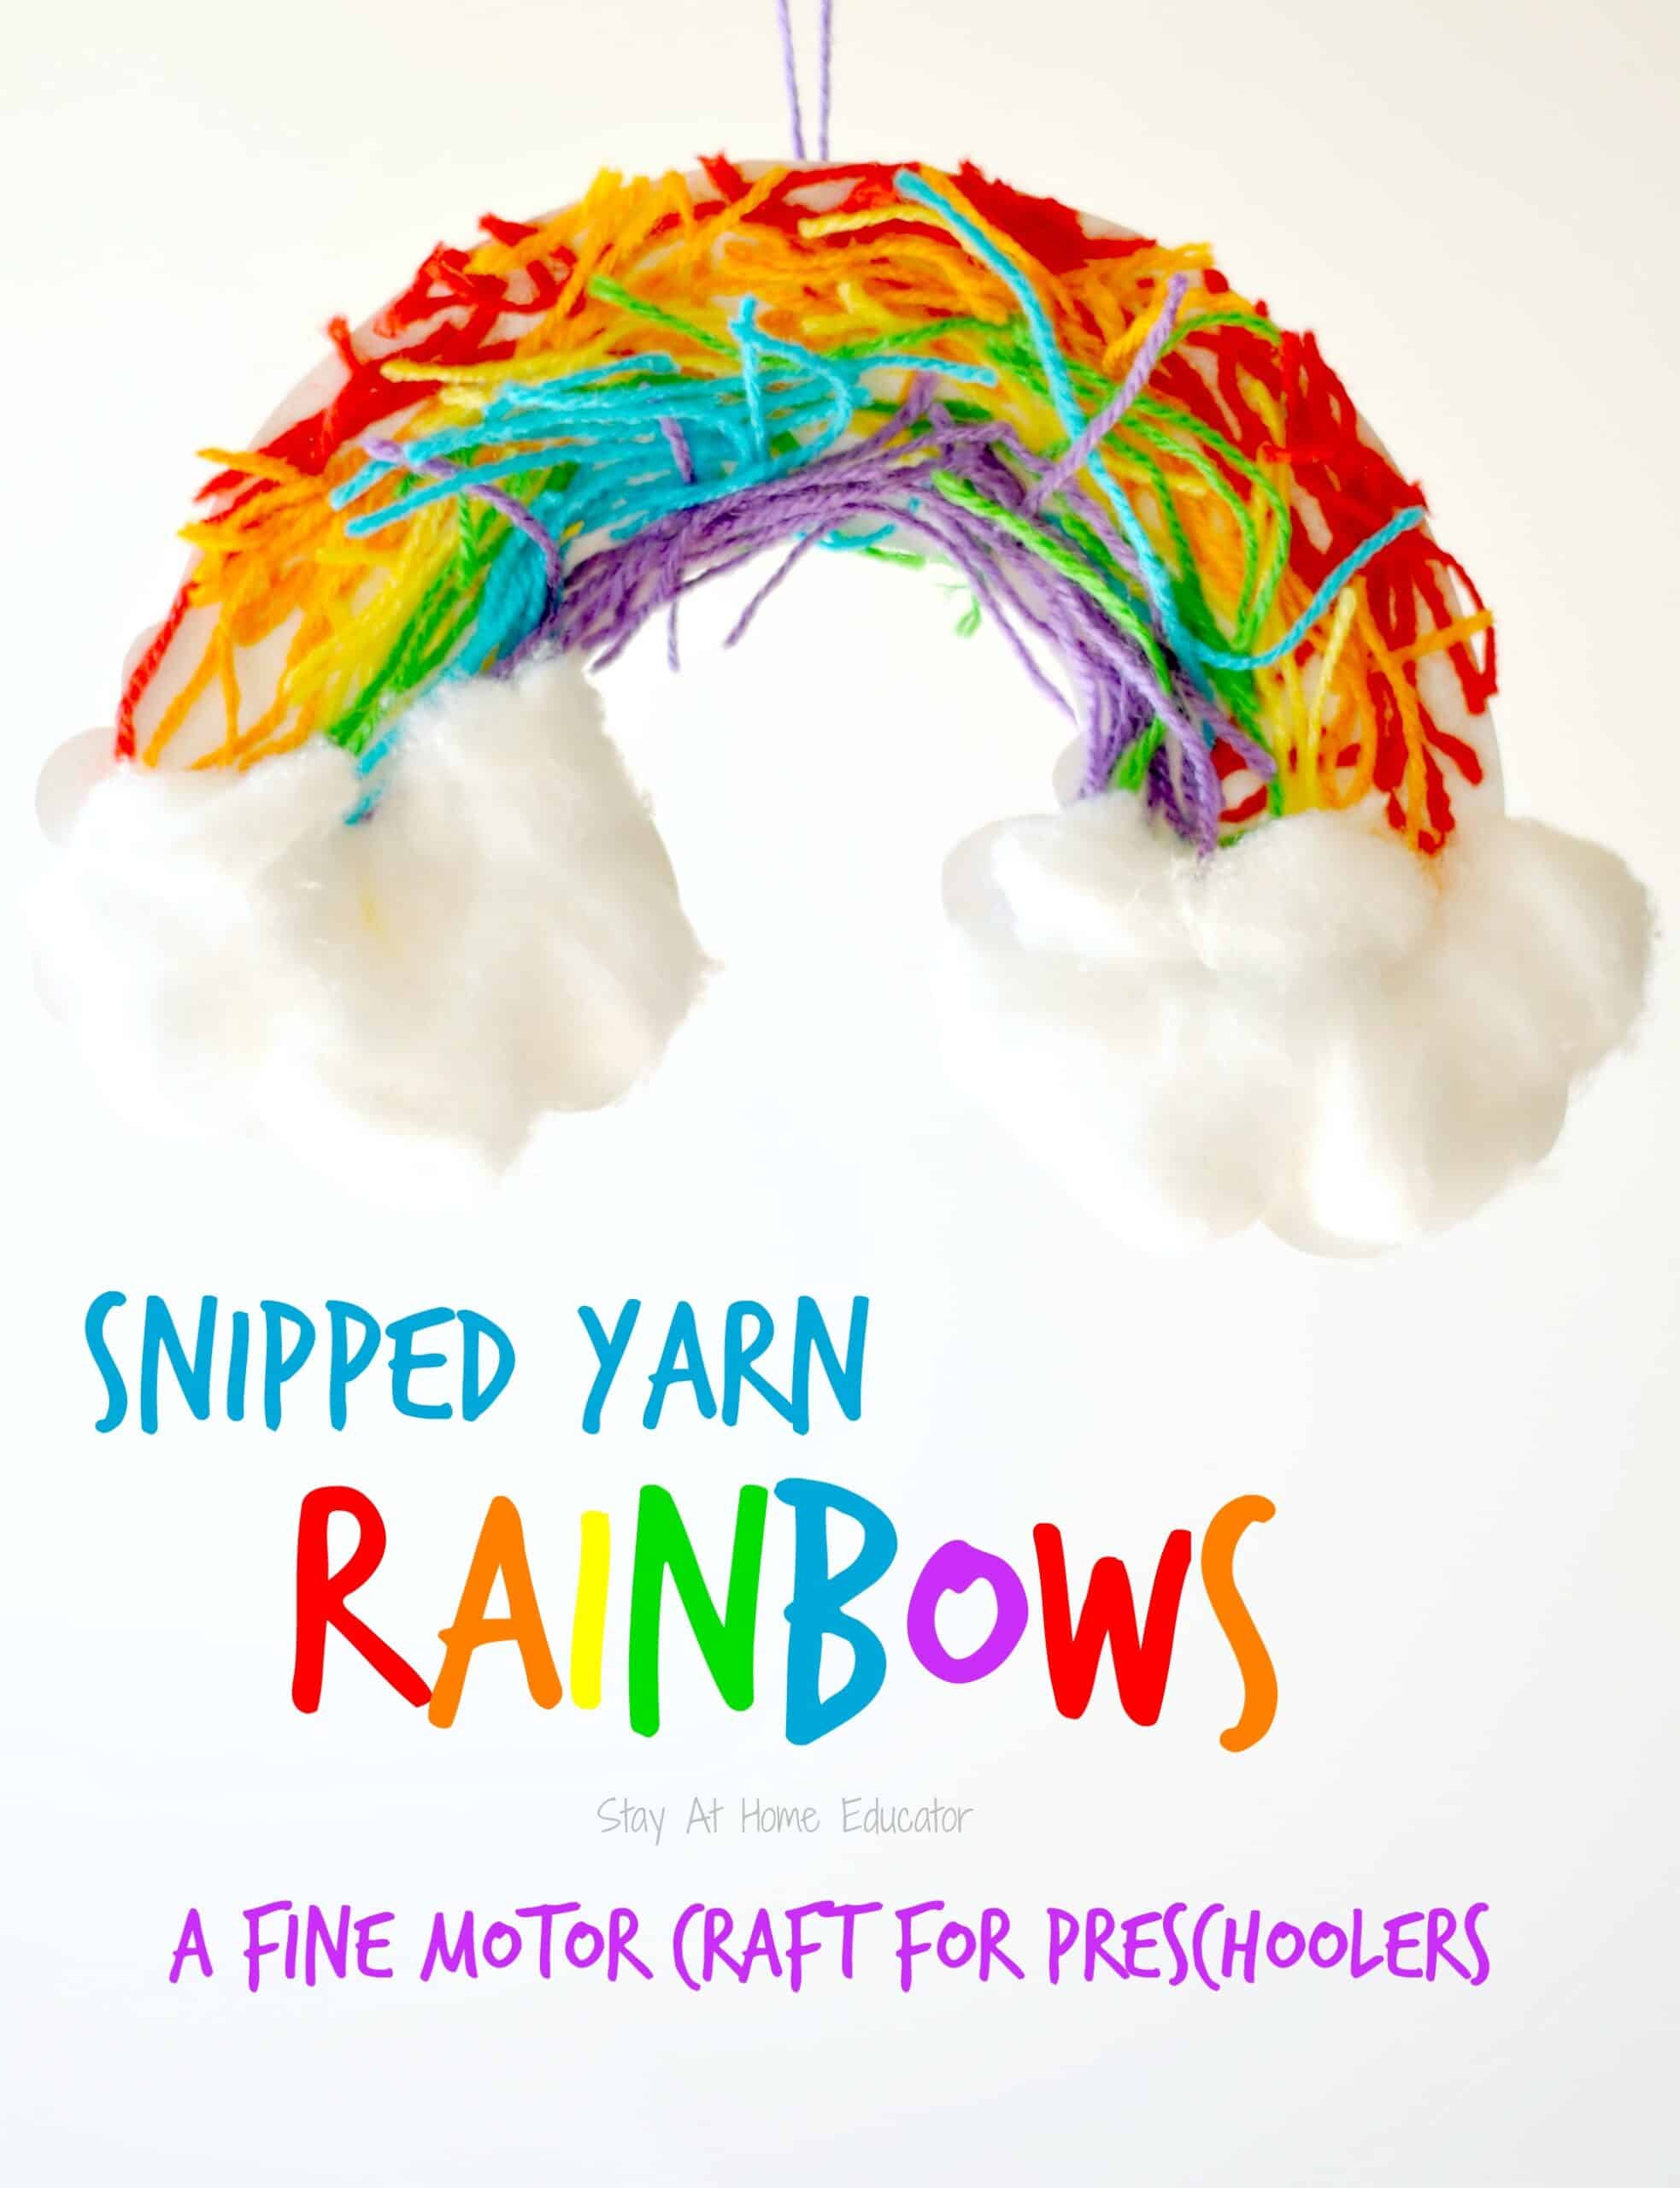 Snipped-yarn-rainbows-a-fine-motor-craft-for-preschoolers-Stay-At-Home-Educator